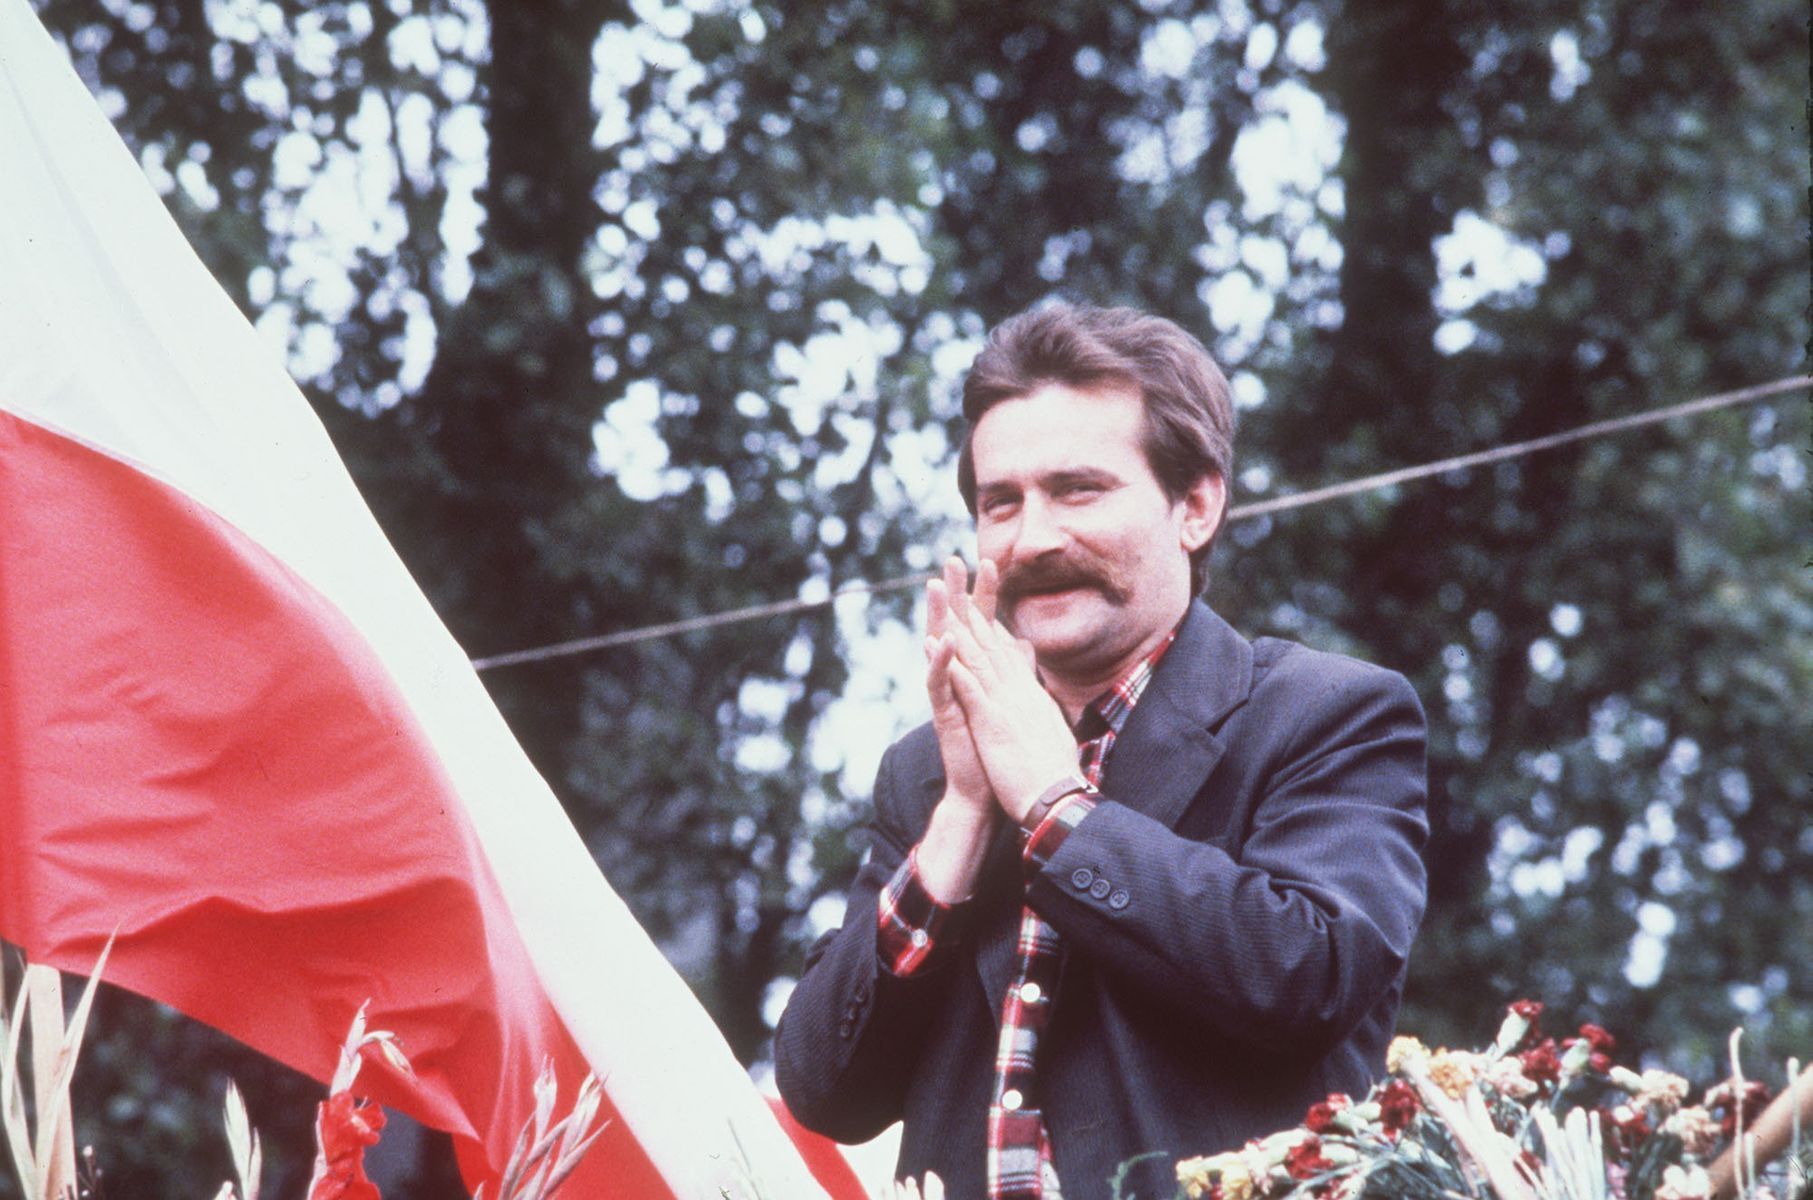 Former Polish president <a href="https://www.nobelprize.org/prizes/peace/1983/walesa/biographical/" rel="noreferrer noopener">Lech Walesa</a> has long symbolized opposition to communism and even won a Nobel Peace Prize for his non-violent resistance to oppression in his country in the 1980s. As head of state from 1990 to 1995, however, he proved authoritarian, conservative, and controversial, the latter due to certain <a href="https://www.cnn.com/2013/03/05/world/europe/poland-walesa-anti-gay/index.html" rel="noreferrer noopener">homophobic remarks</a>.